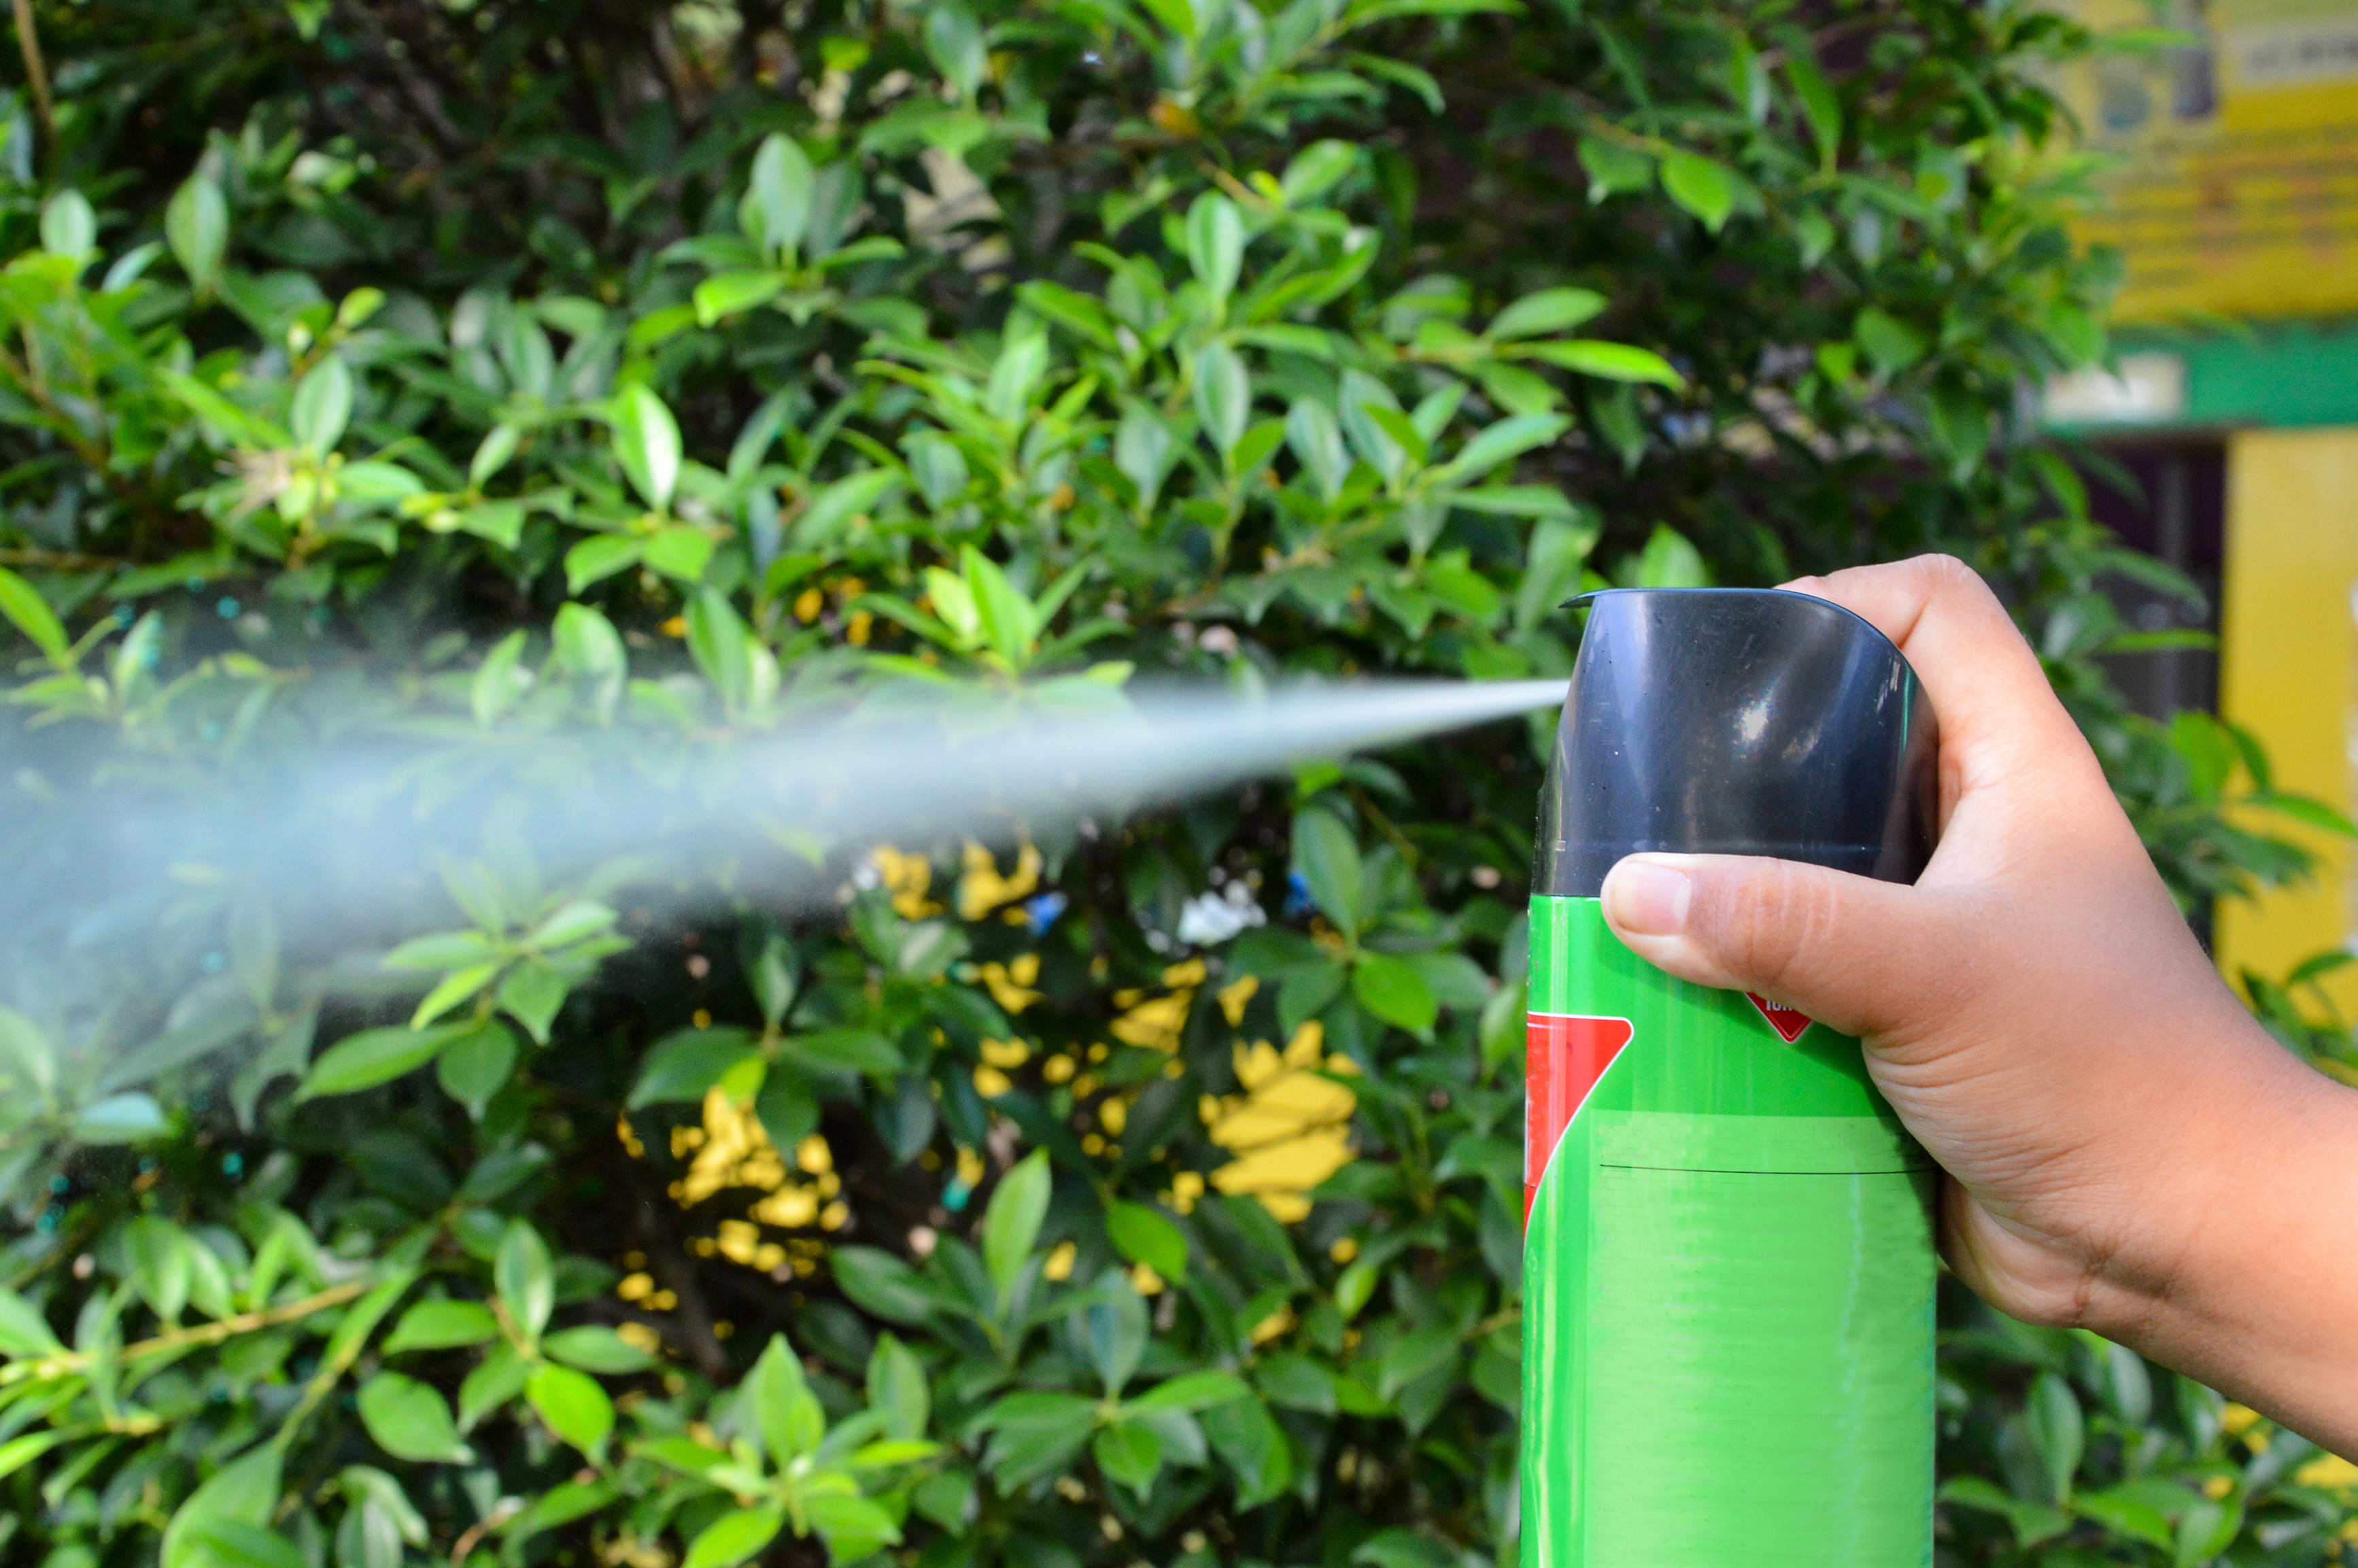 If soap and water aren't effective, consider using insecticides. | Source: Shutterstock